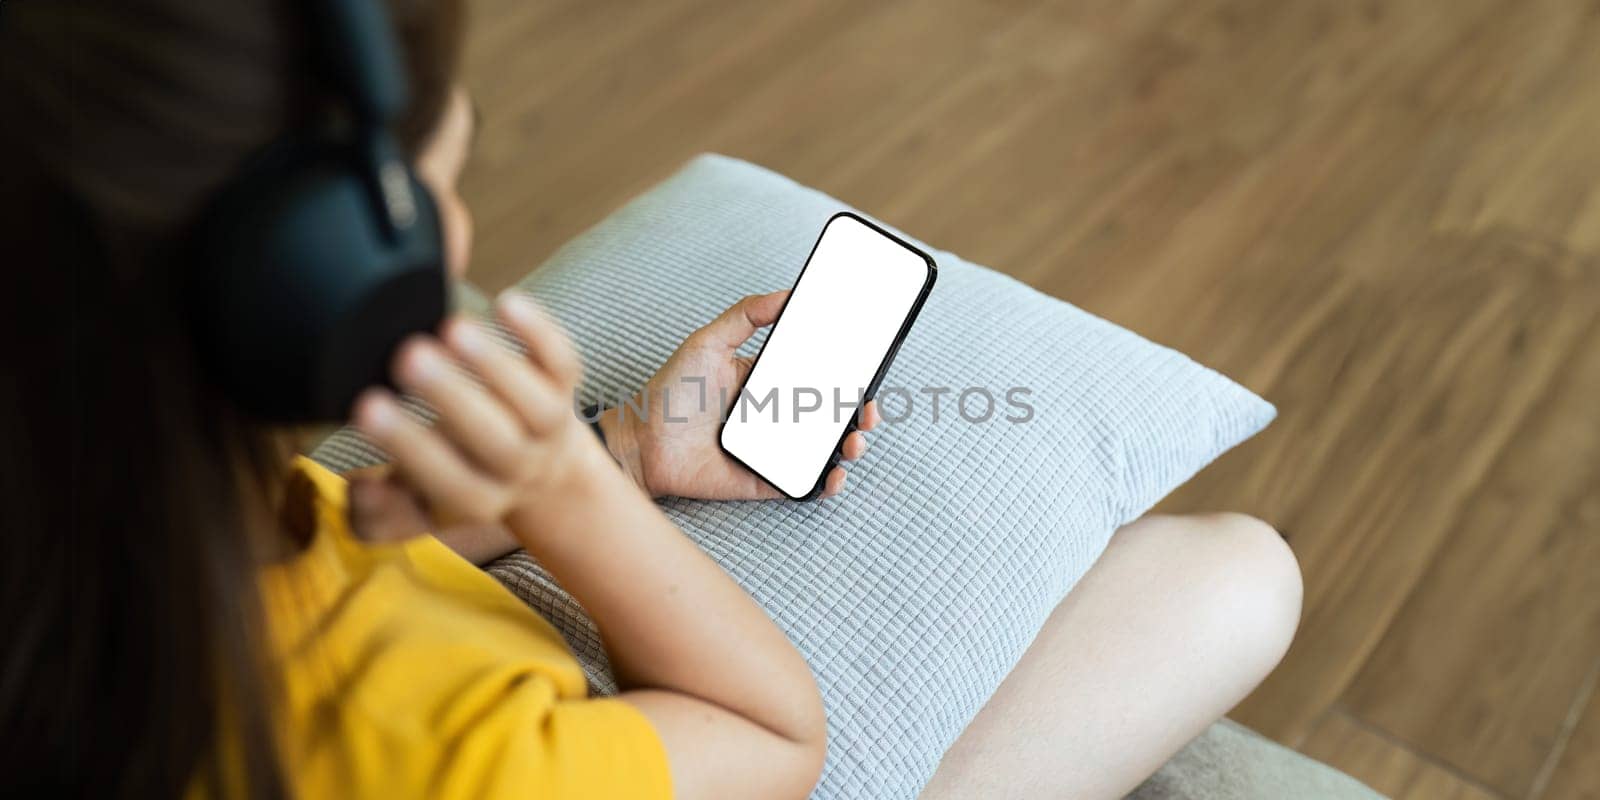 Closed up with Asian woman feels relax using smartphone in living room, Blank screen of smartphone.